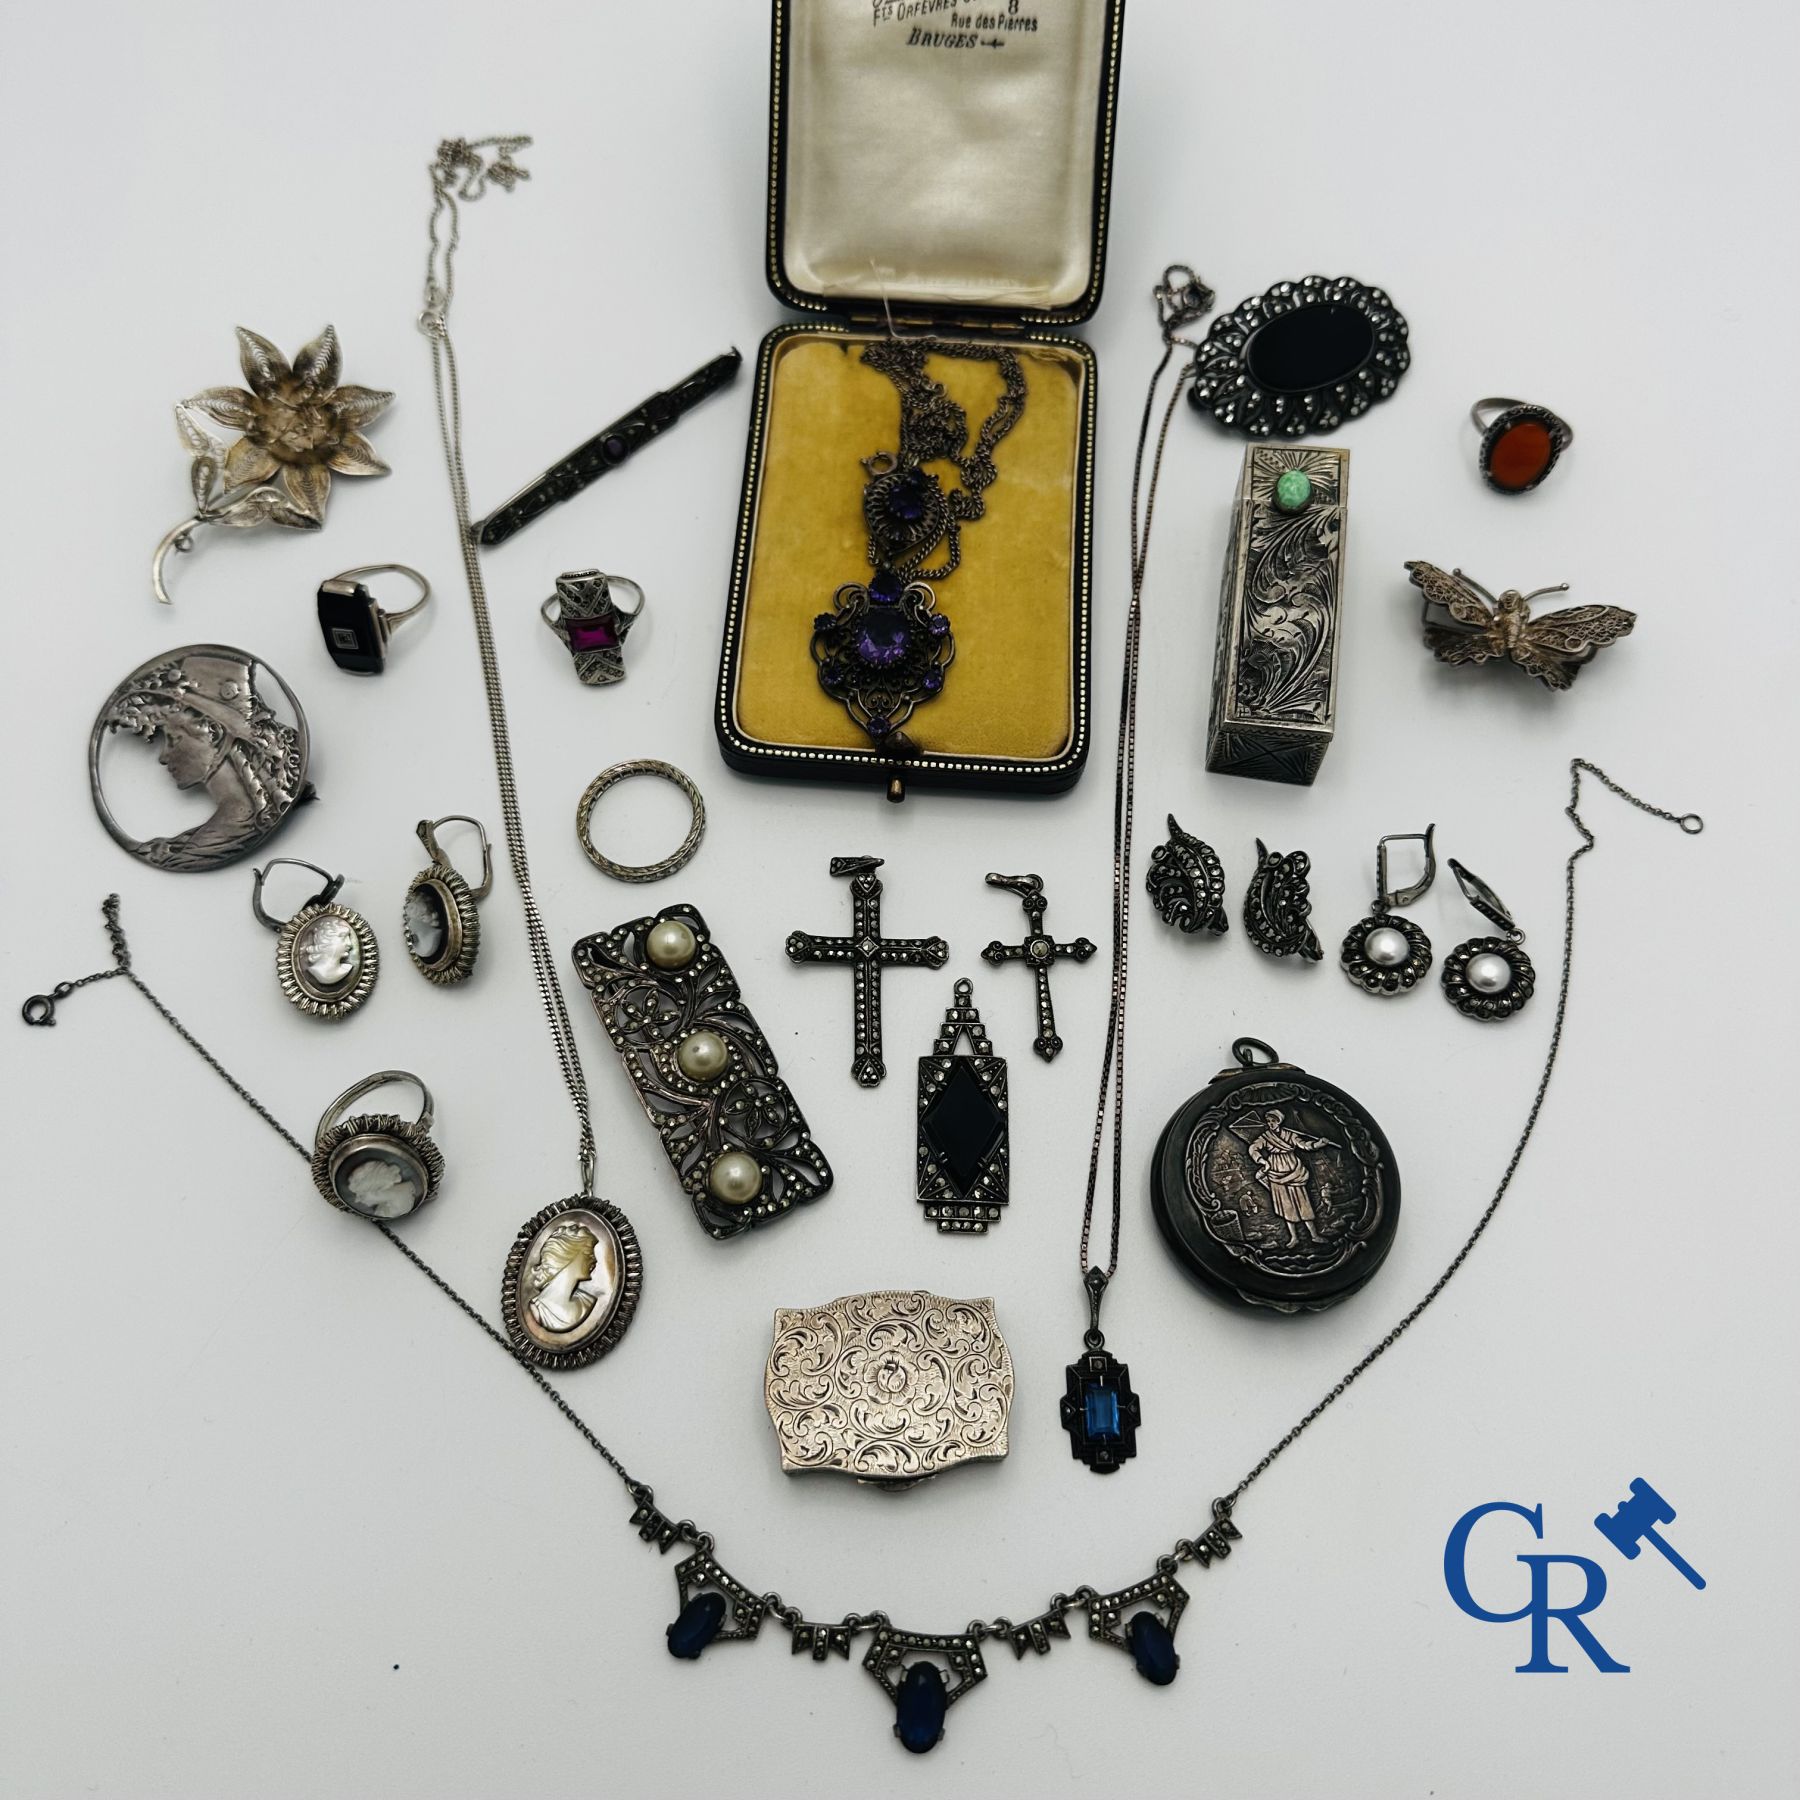 Jewellery: Beautiful lot of old silver jewellery and objects, most of them from the Art Deco period.